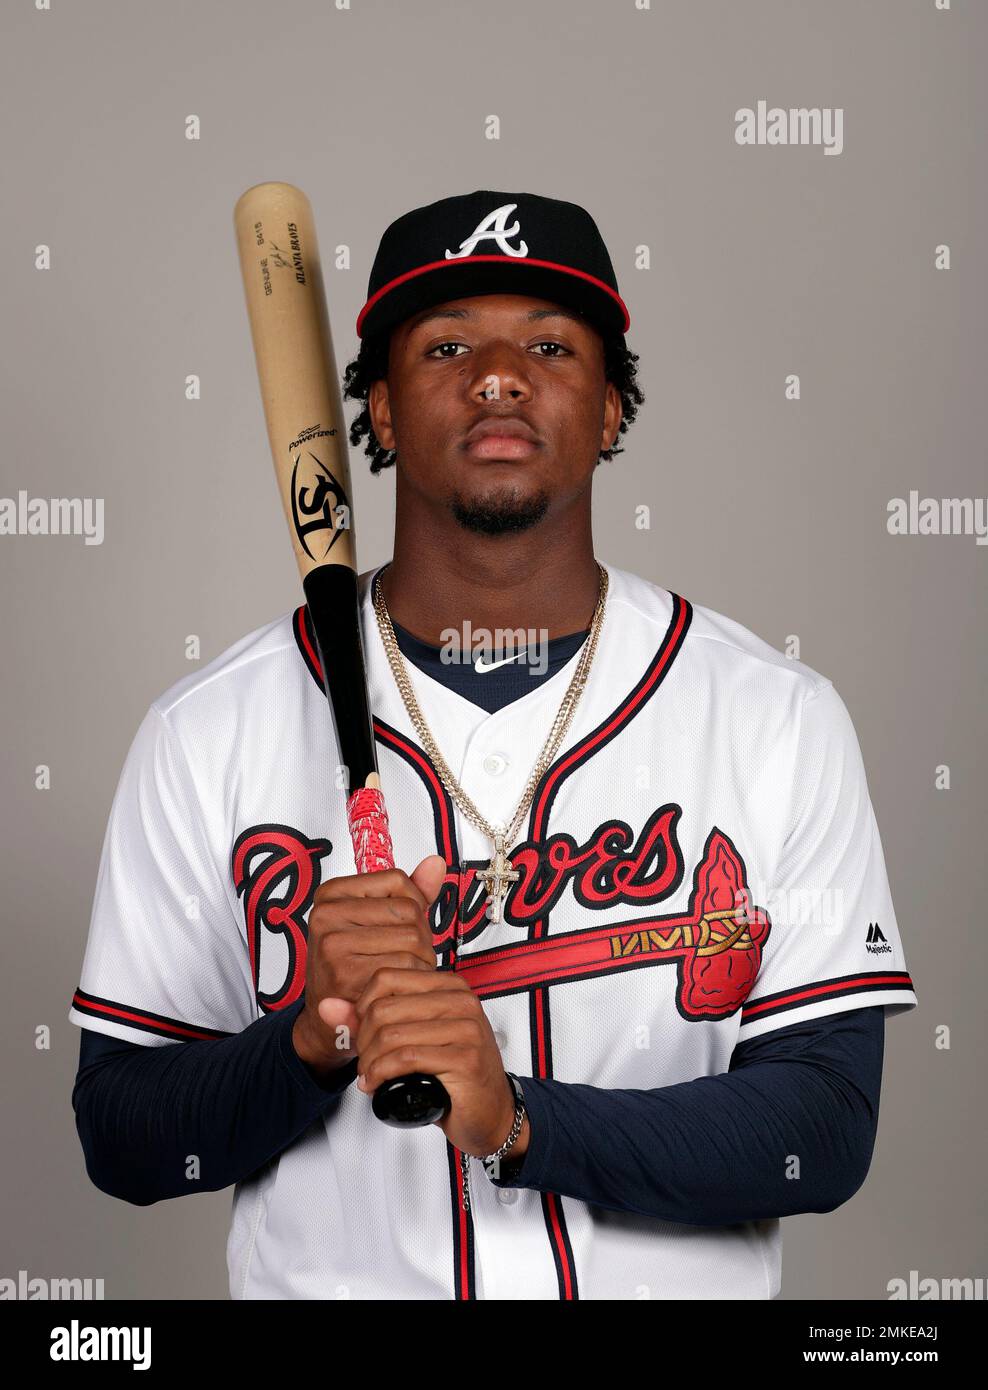 This is a 2019 photo of Ronald Acuna Jr. of the Atlanta Braves baseball team. This image reflects the 2019 active roster as of Friday Feb. 22, 2019, when this image was taken. (AP Photo/John Raoux) Stock Photo